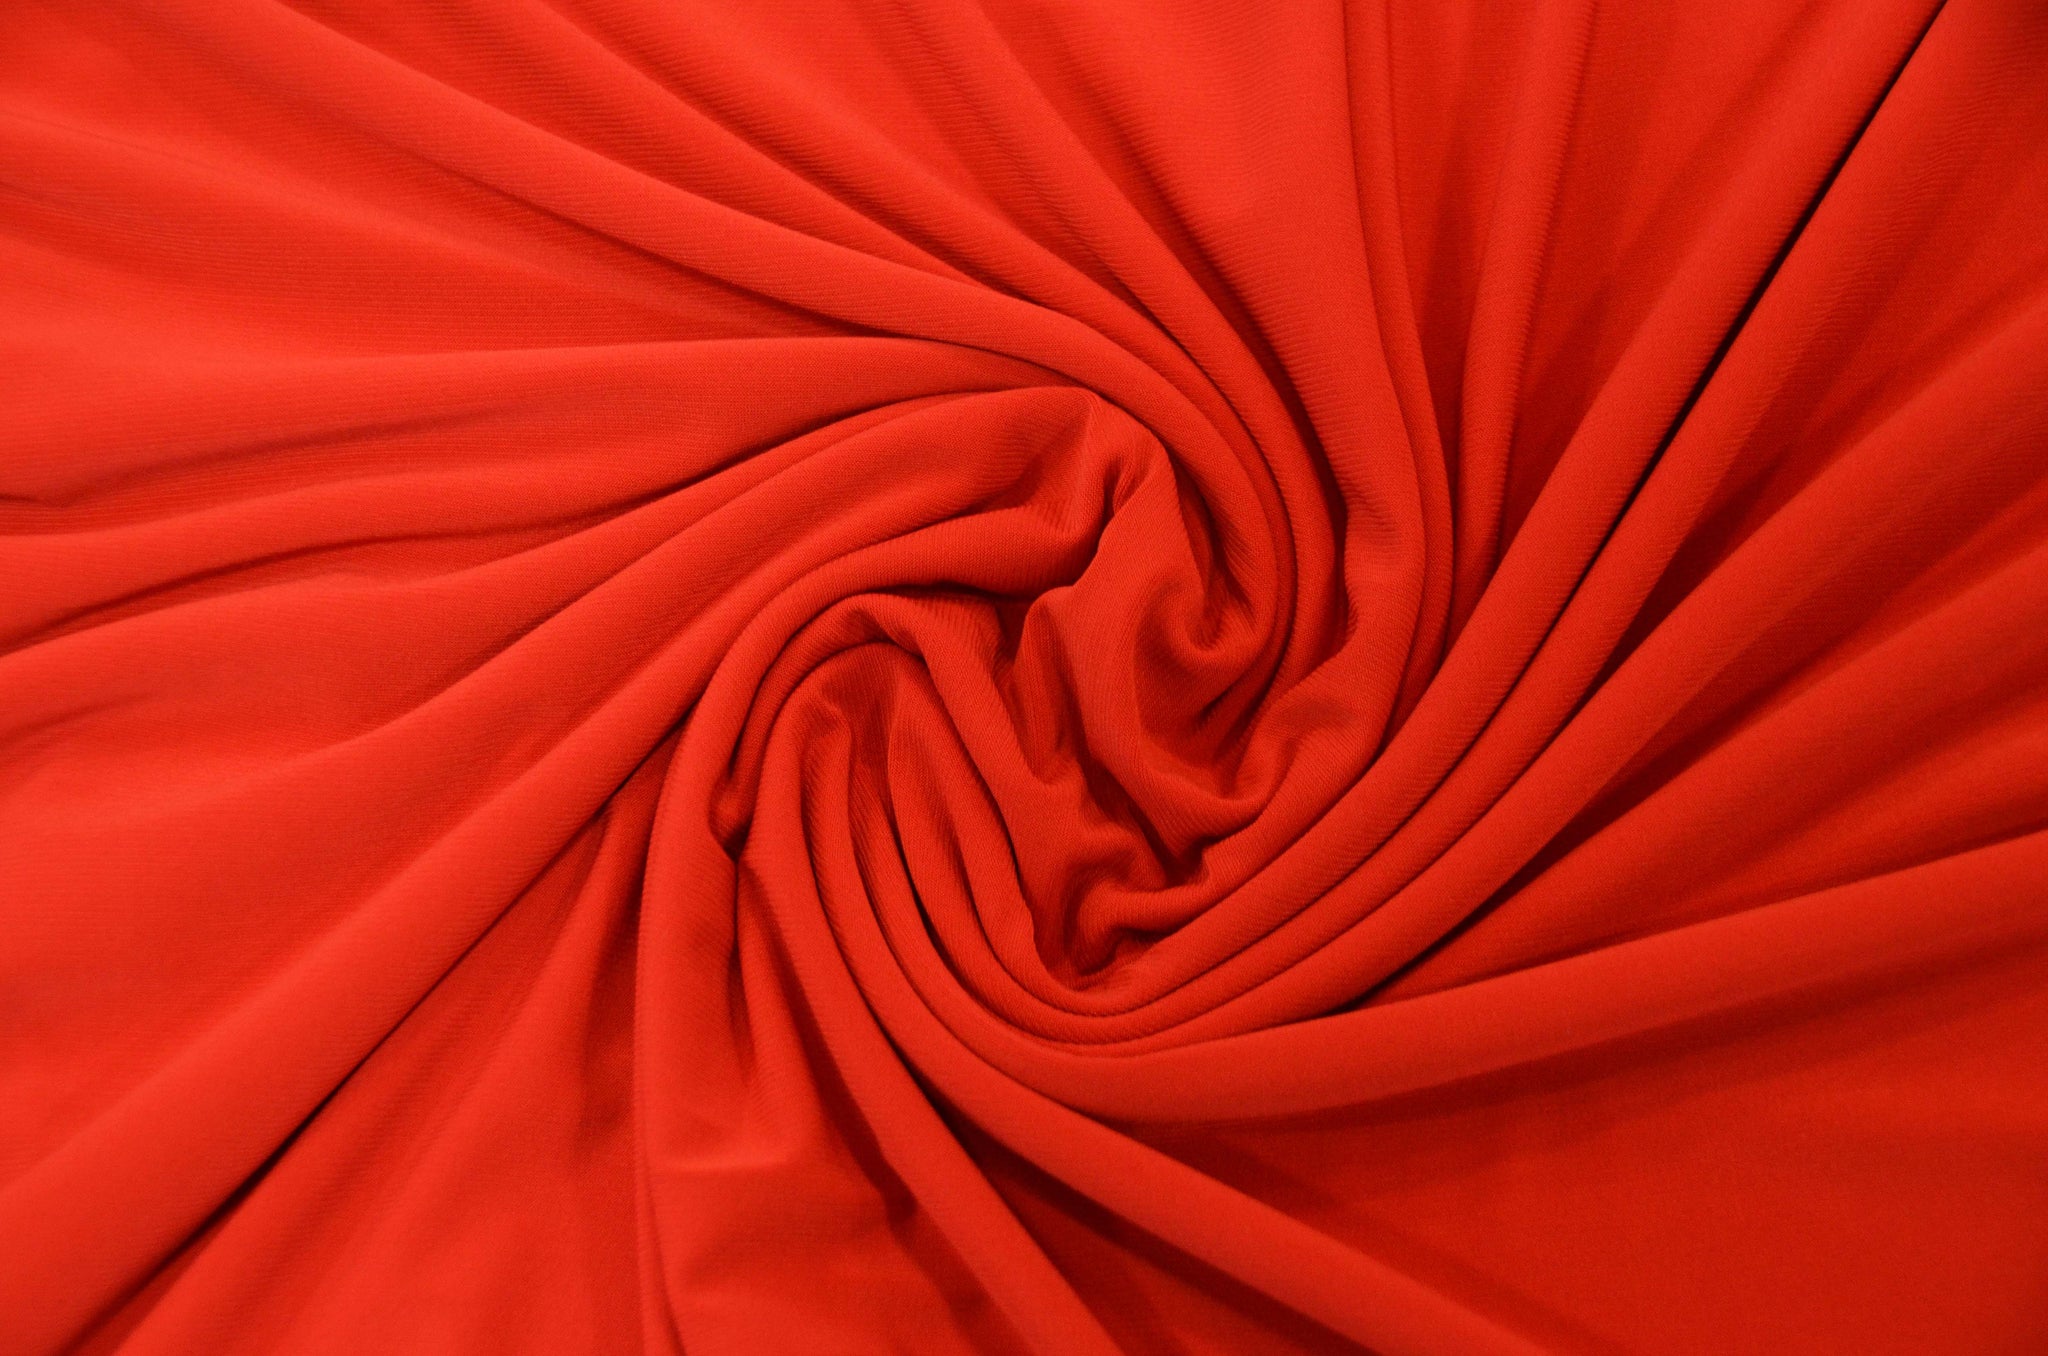 Buy 100% Cotton Fabric Plain Colours: Reds, Yellows, Greens, Blues